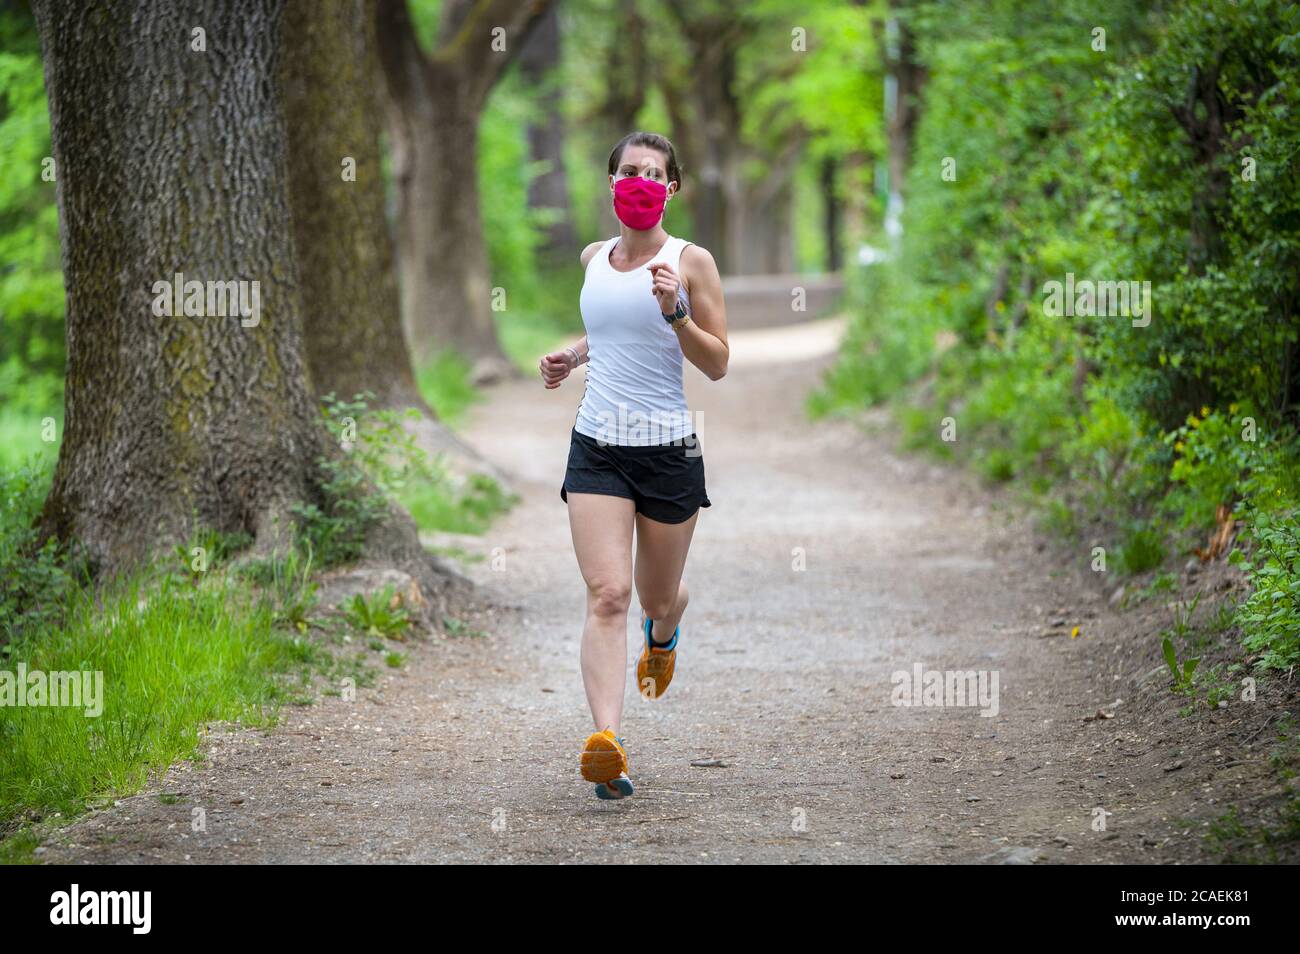 Stay in fit during Coronavirus. A sportive woman is jogging outdoor, she have protective mask on face. Running in the days of the Covid-19. Stock Photo